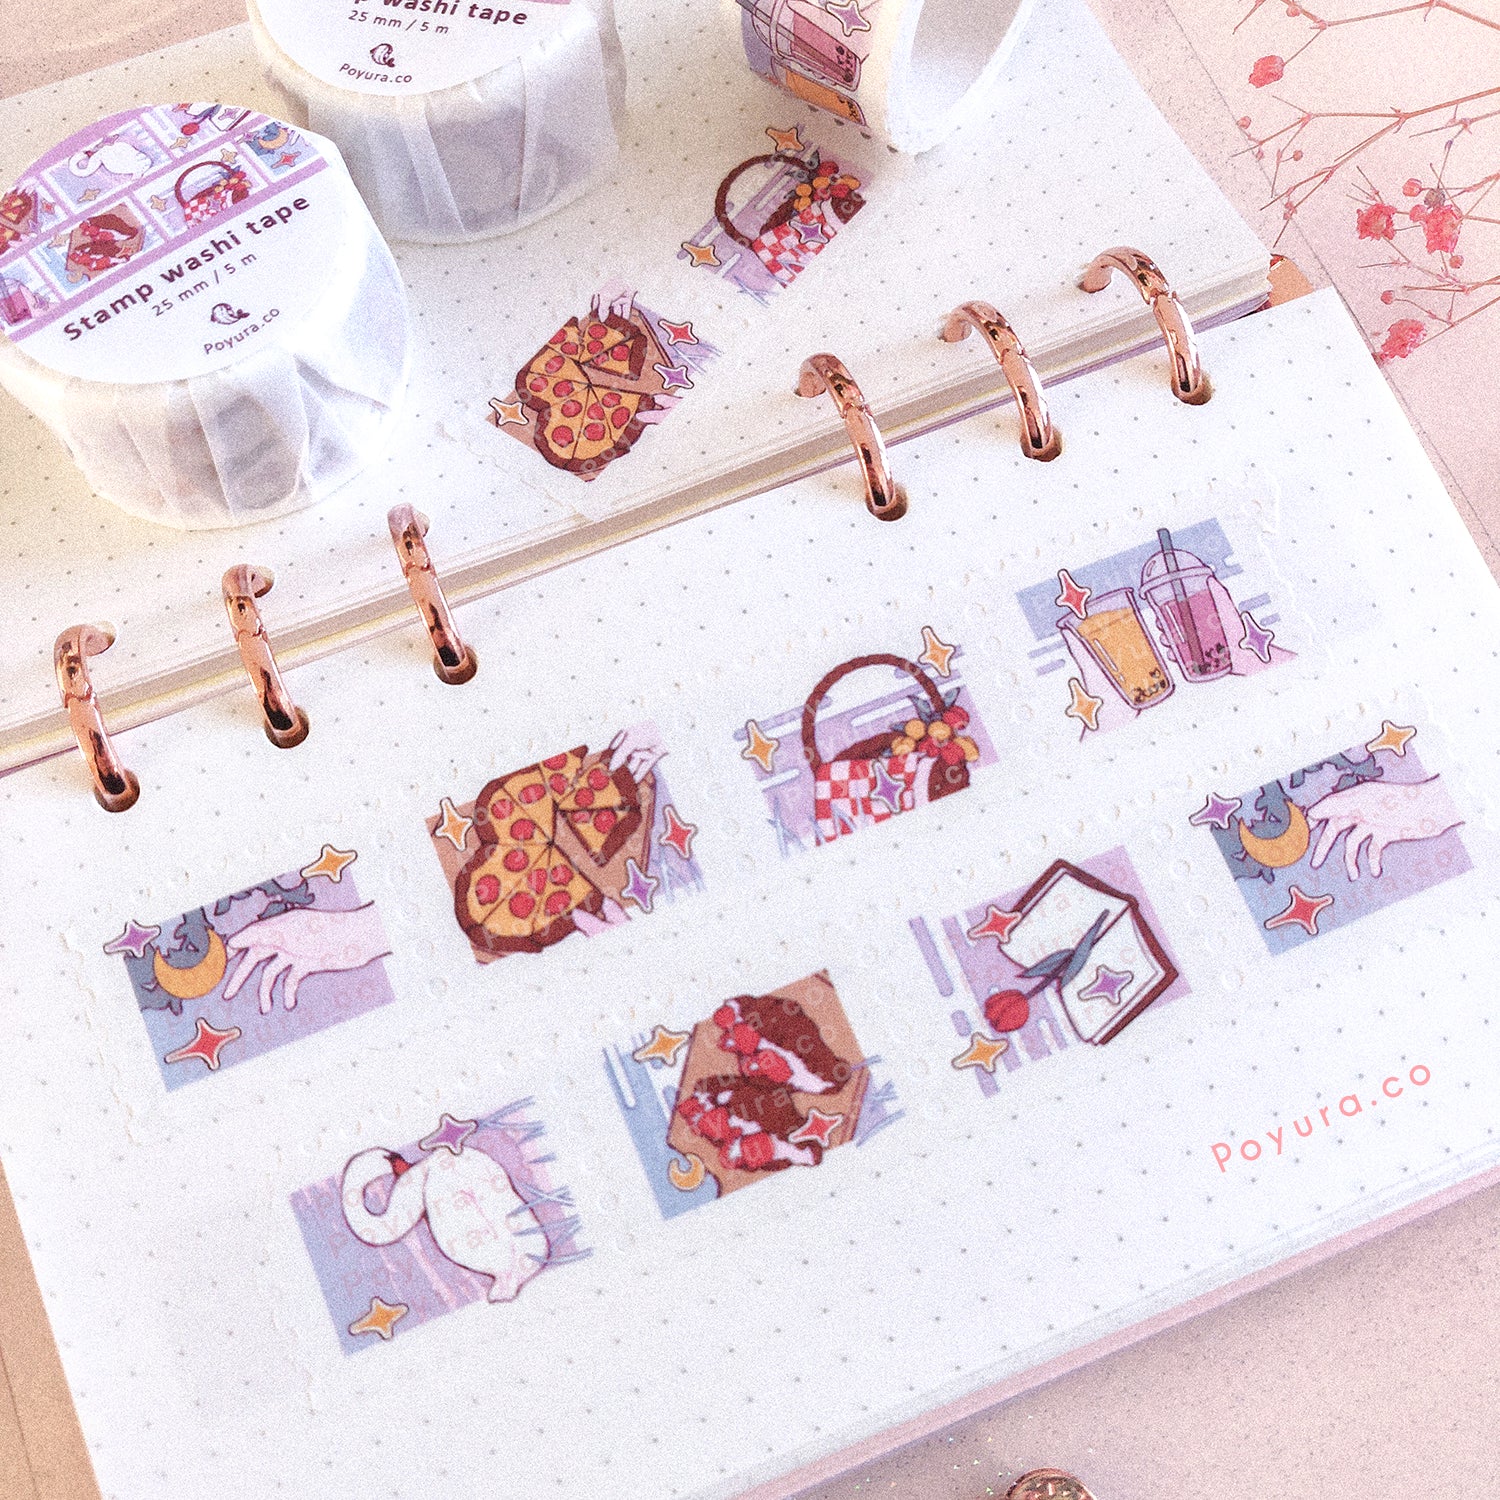 Picnic date valentine food cafe bubble tea bob drink basket pizza reading book croissant bread strawberry snack dessert swan animal heart love deco tiny small orange food luck aesthetic cute polco kpop journal toploader sticker stamp washi tape